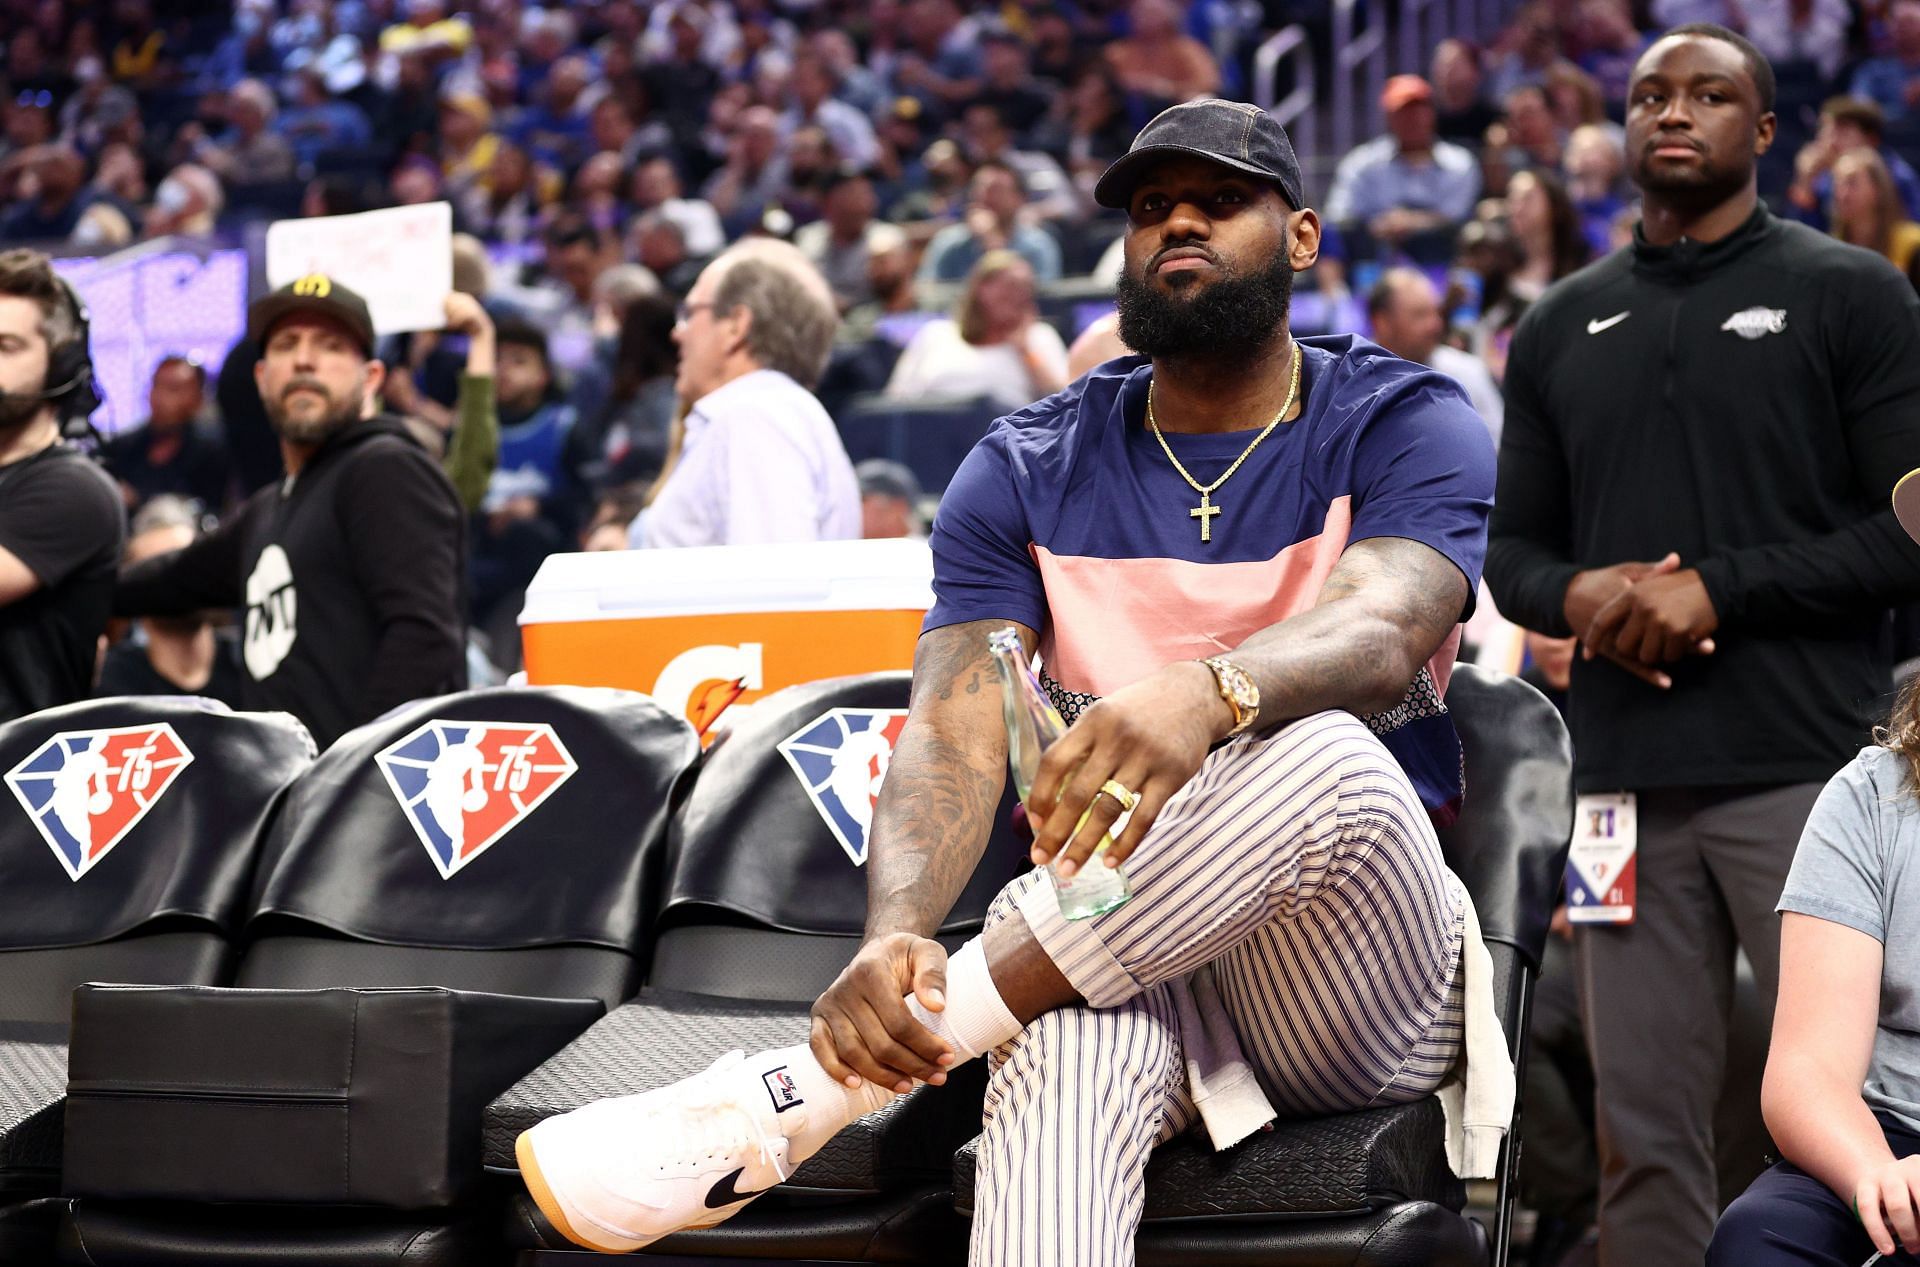 LeBron James watches the game